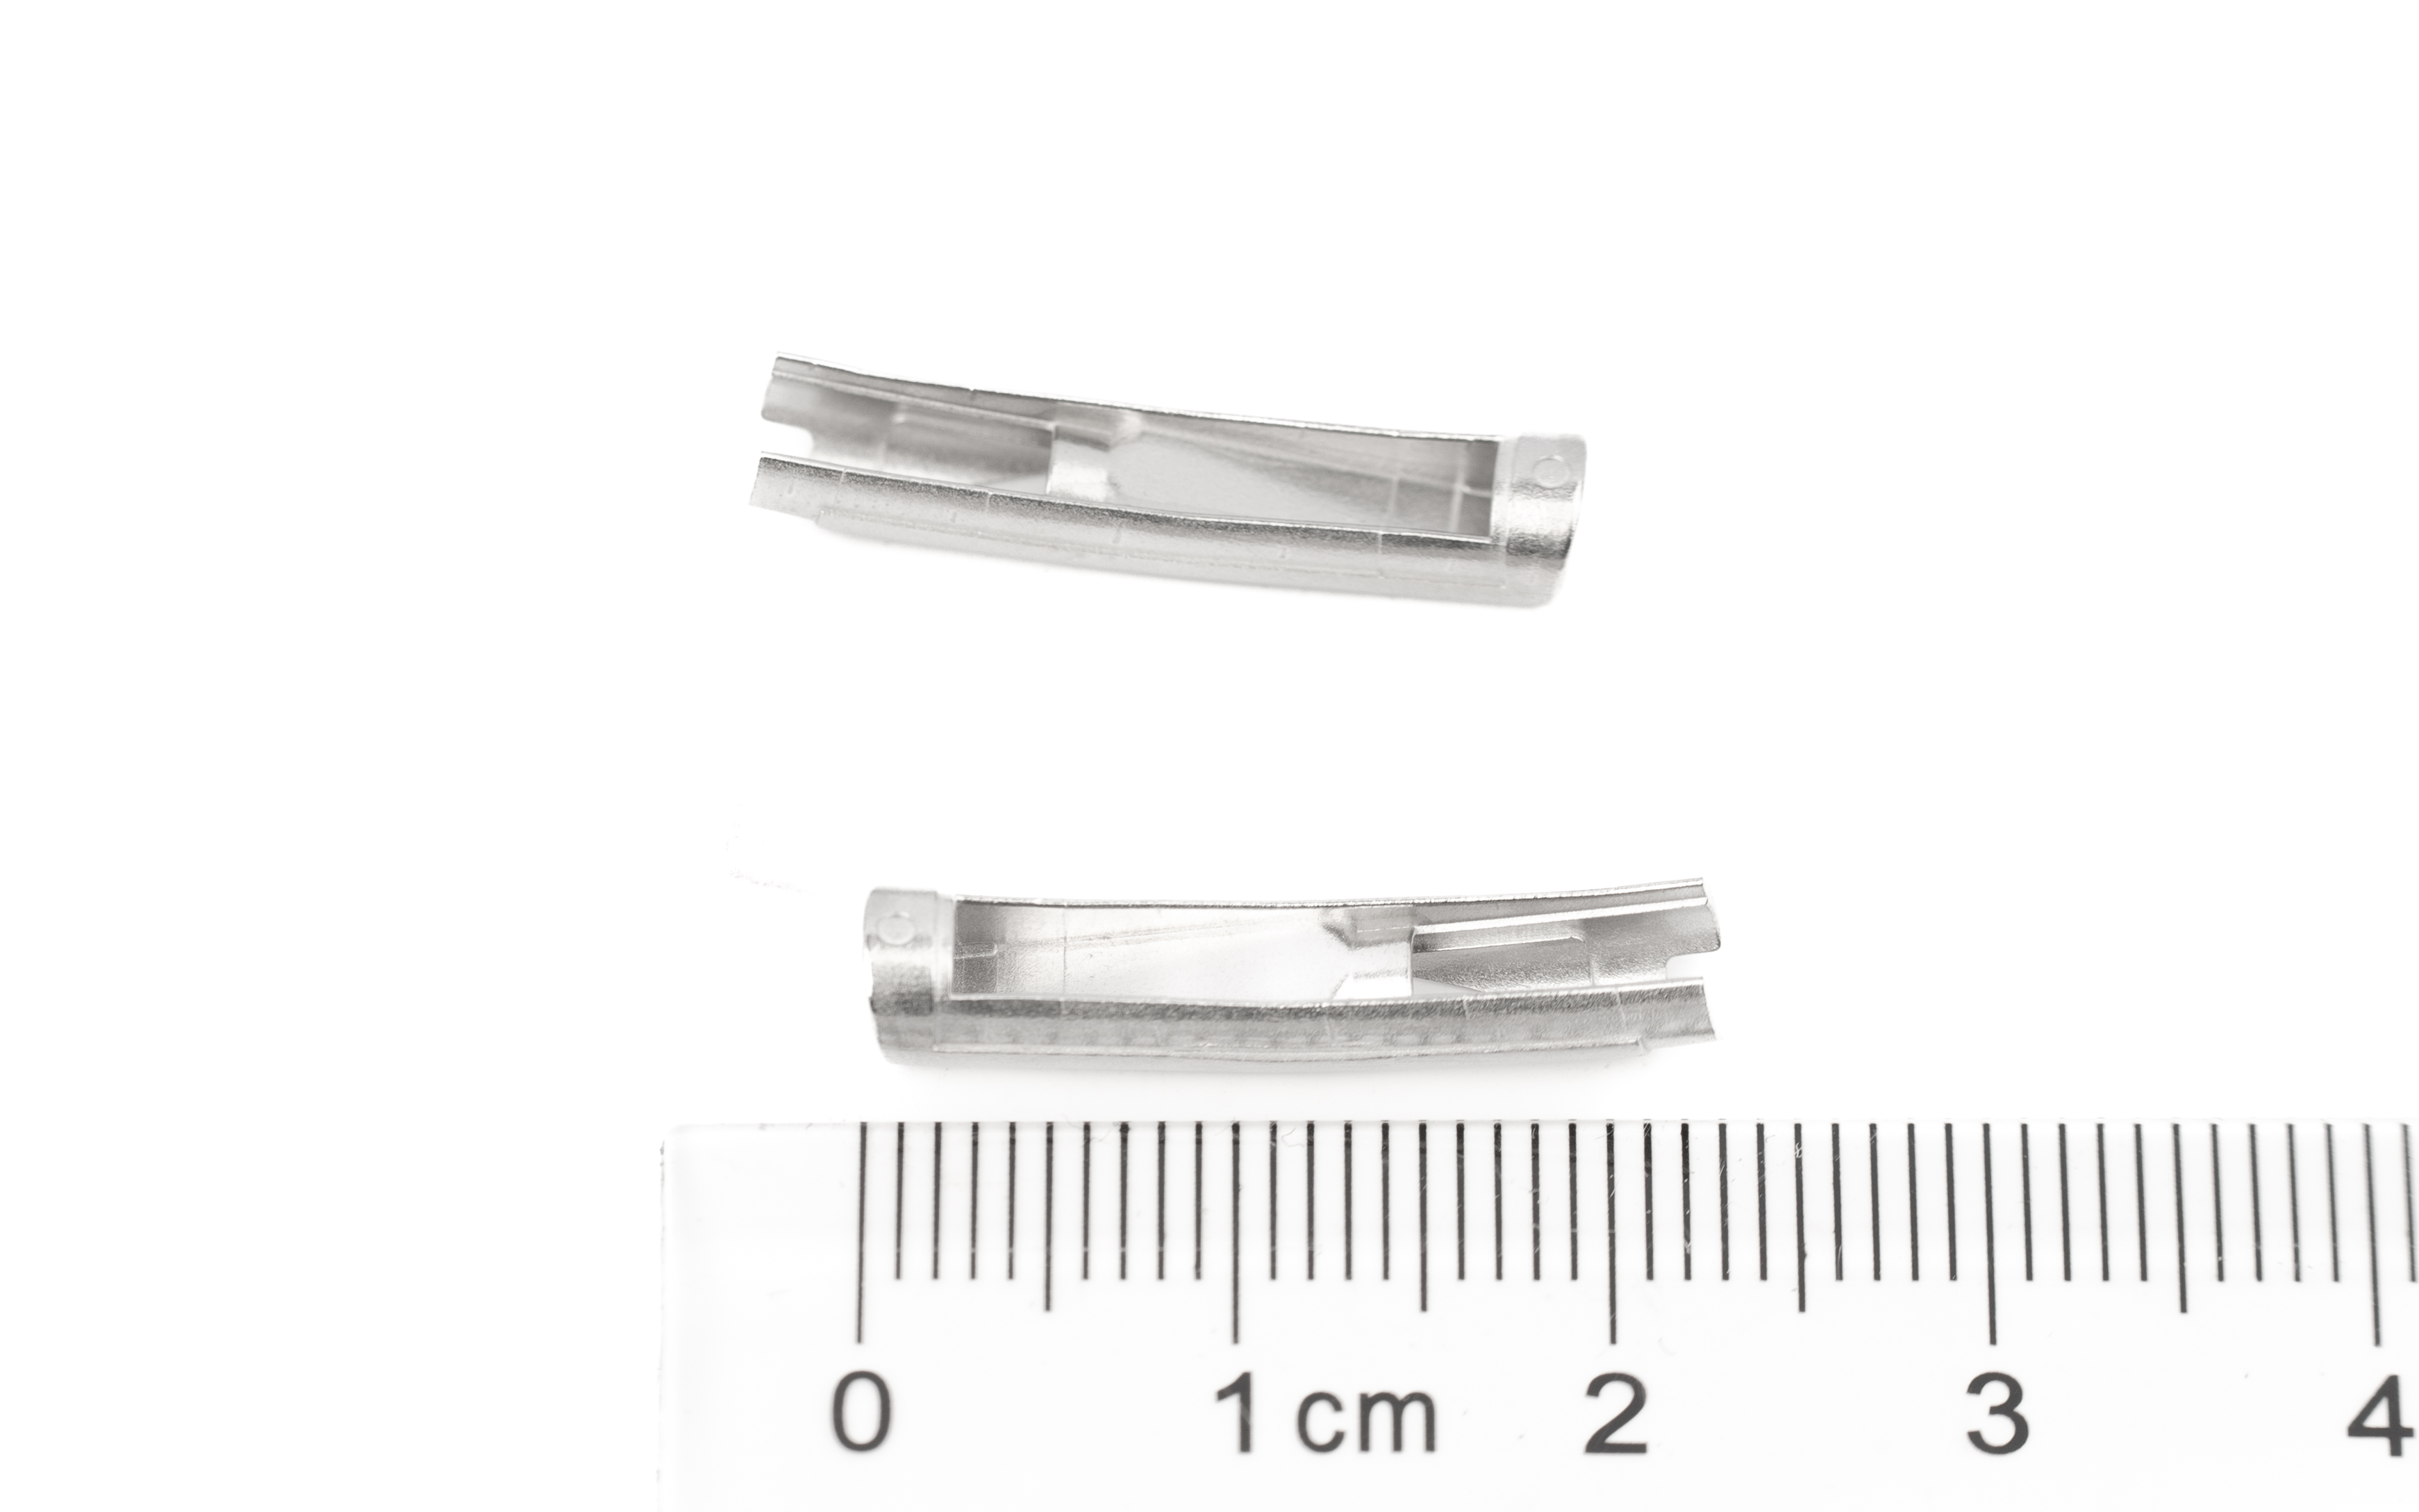 Surgical blade assembly parts